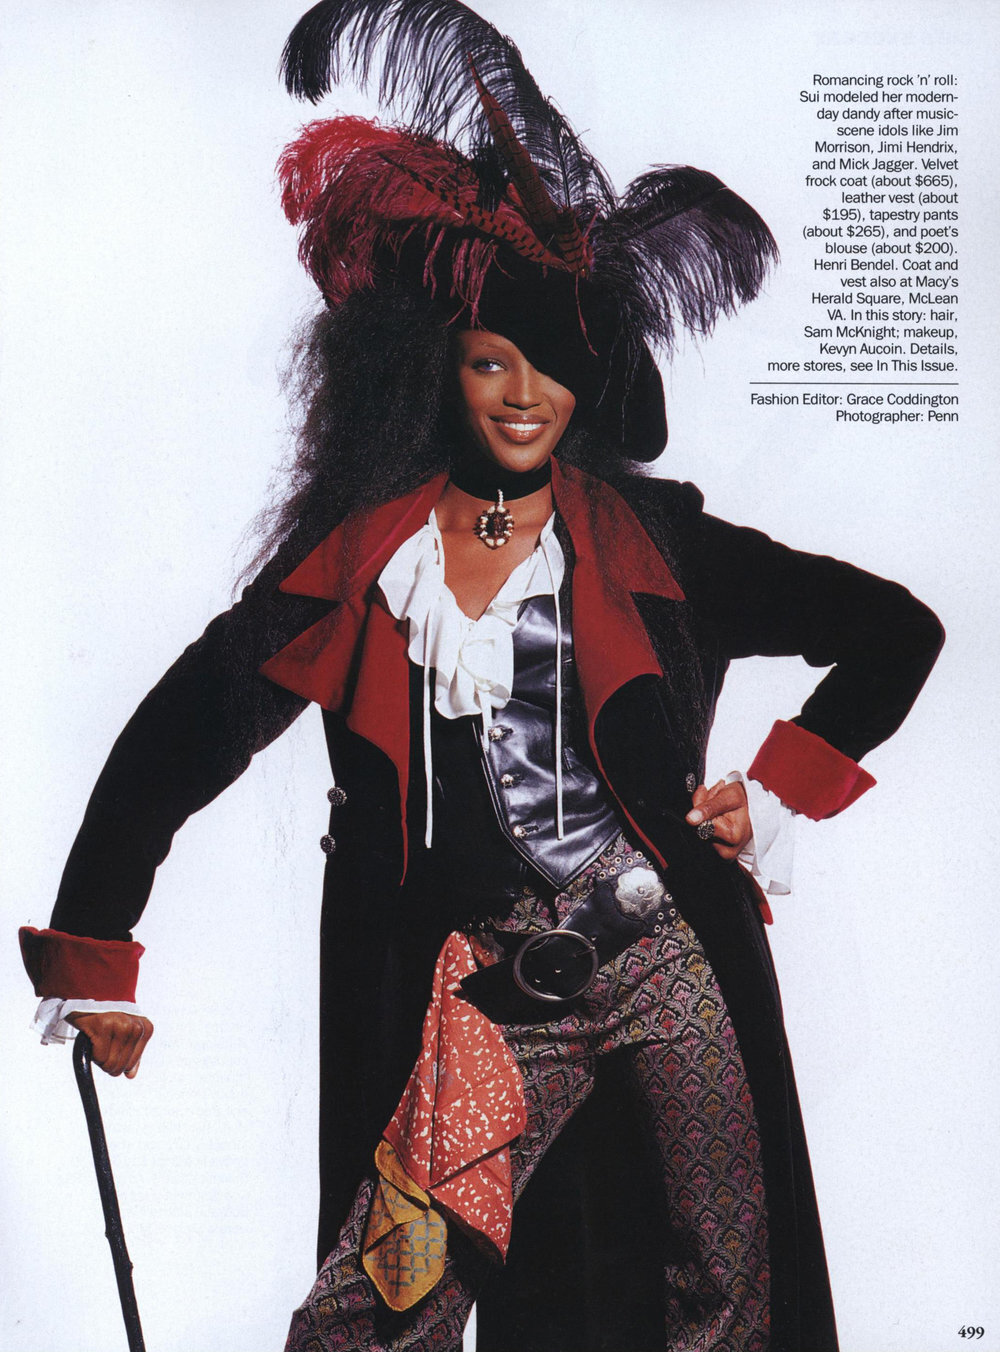 Sui does pirate-style. Naomi Campbell photographed by Irving Penn for Vogue, September 1992.